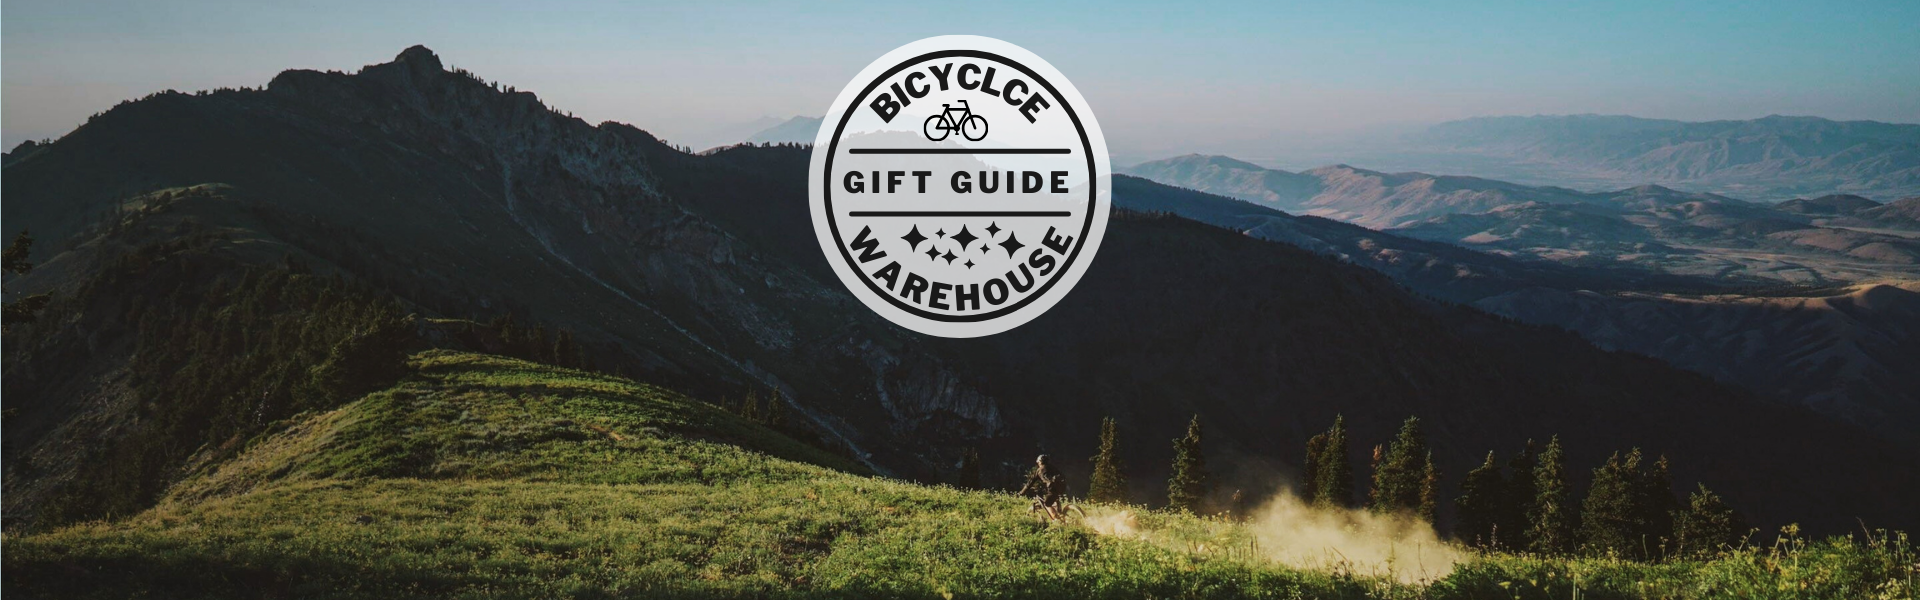 Bicycle gifts for sale